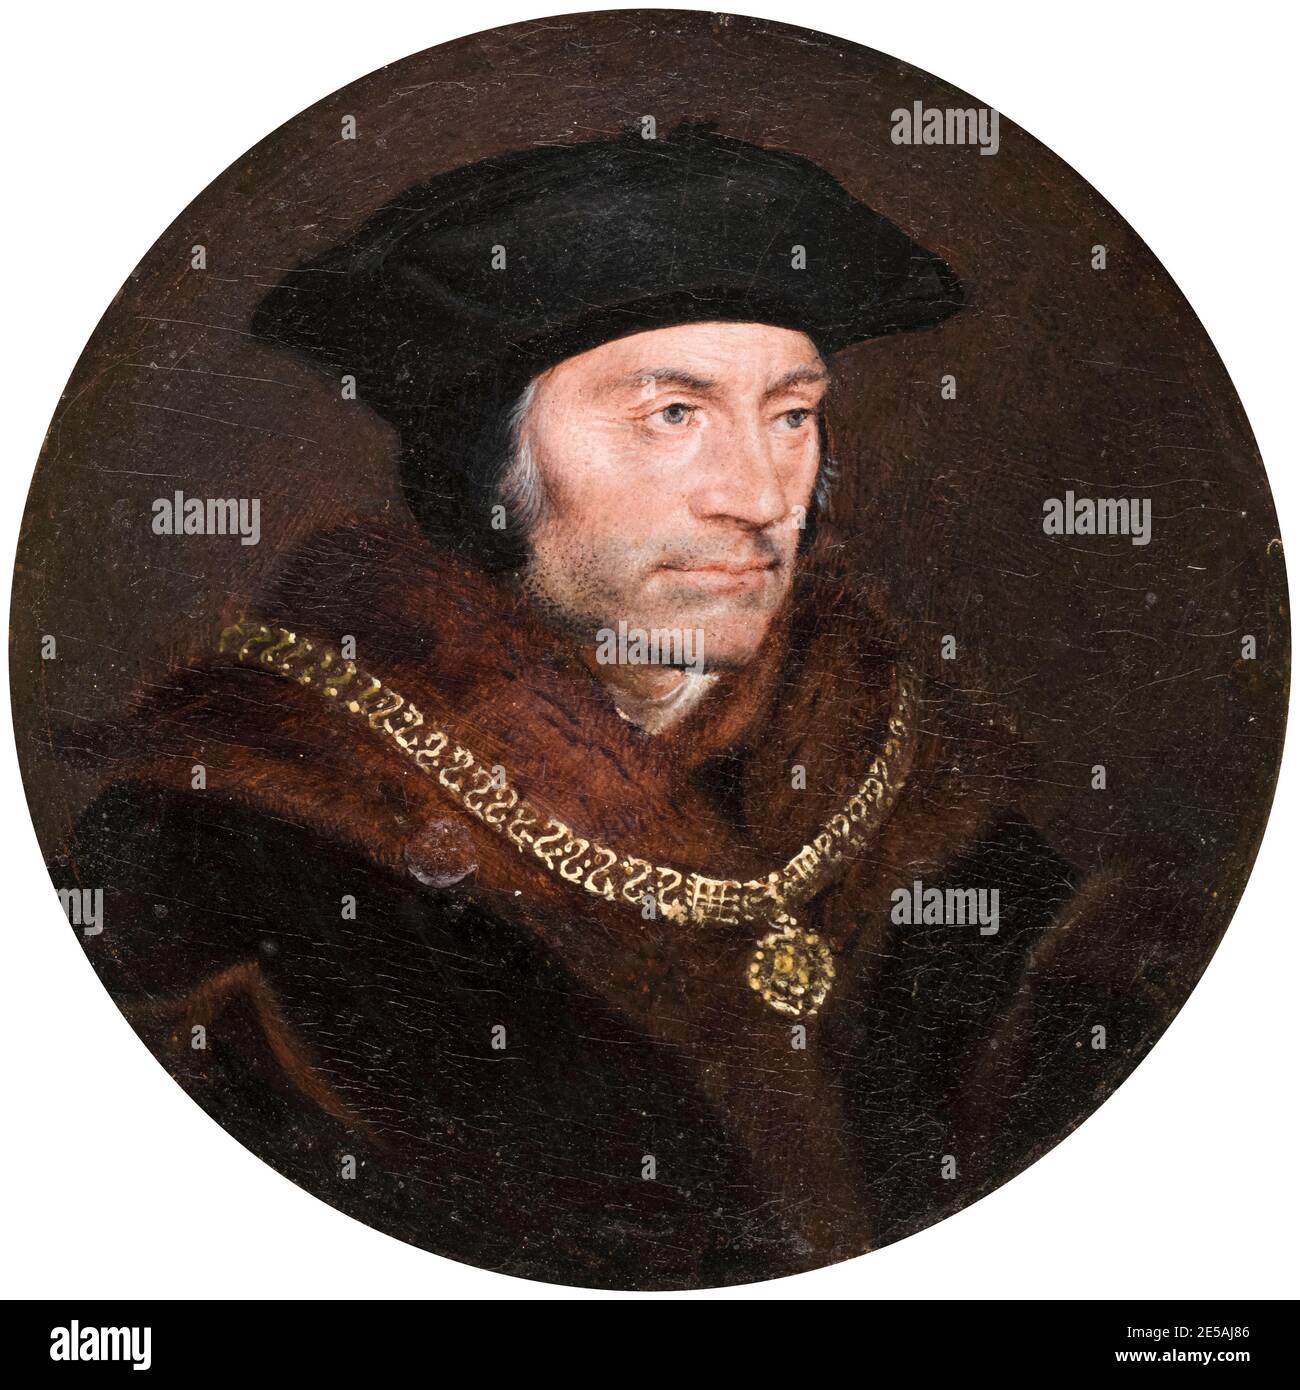 Sir Thomas More (1478-1535), Lord High Chancellor of England under King Henry VIII, portrait painting by a follower of Hans Holbein the Younger, 1600-1699 Stock Photo